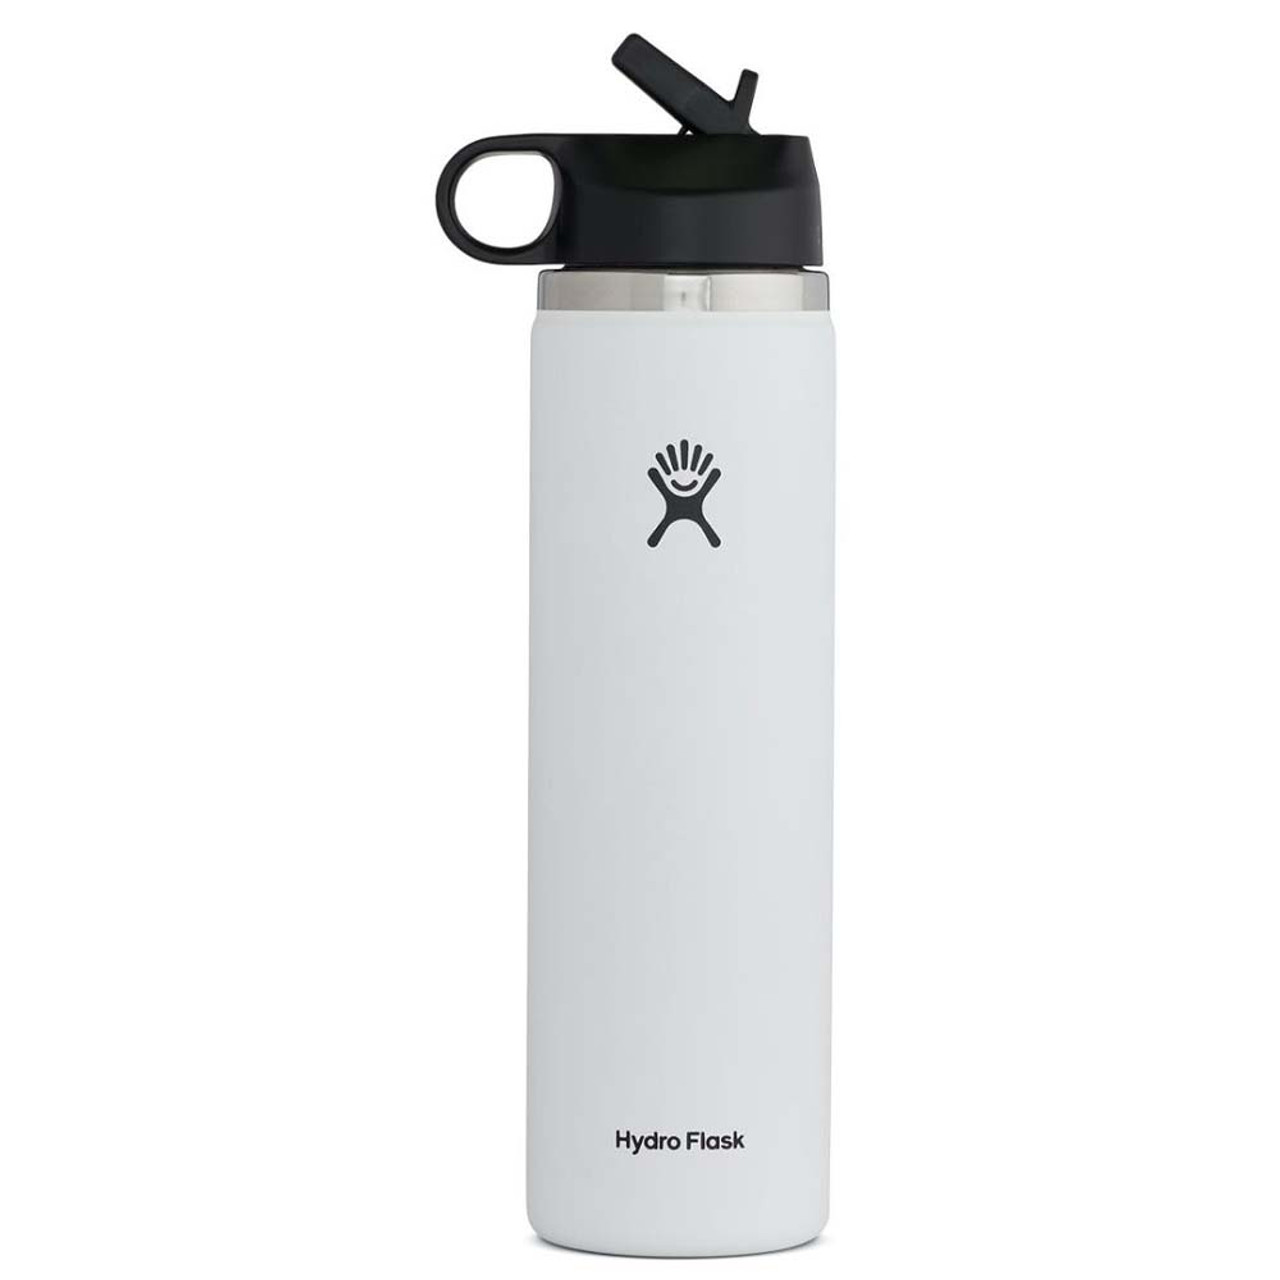 https://cdn11.bigcommerce.com/s-zut1msomd6/images/stencil/1280x1280/products/27786/213566/hydroflask-W24BSW-24-oz-wide-mouth-w-straw-lid-white-main__64802.1652203410.jpg?c=1